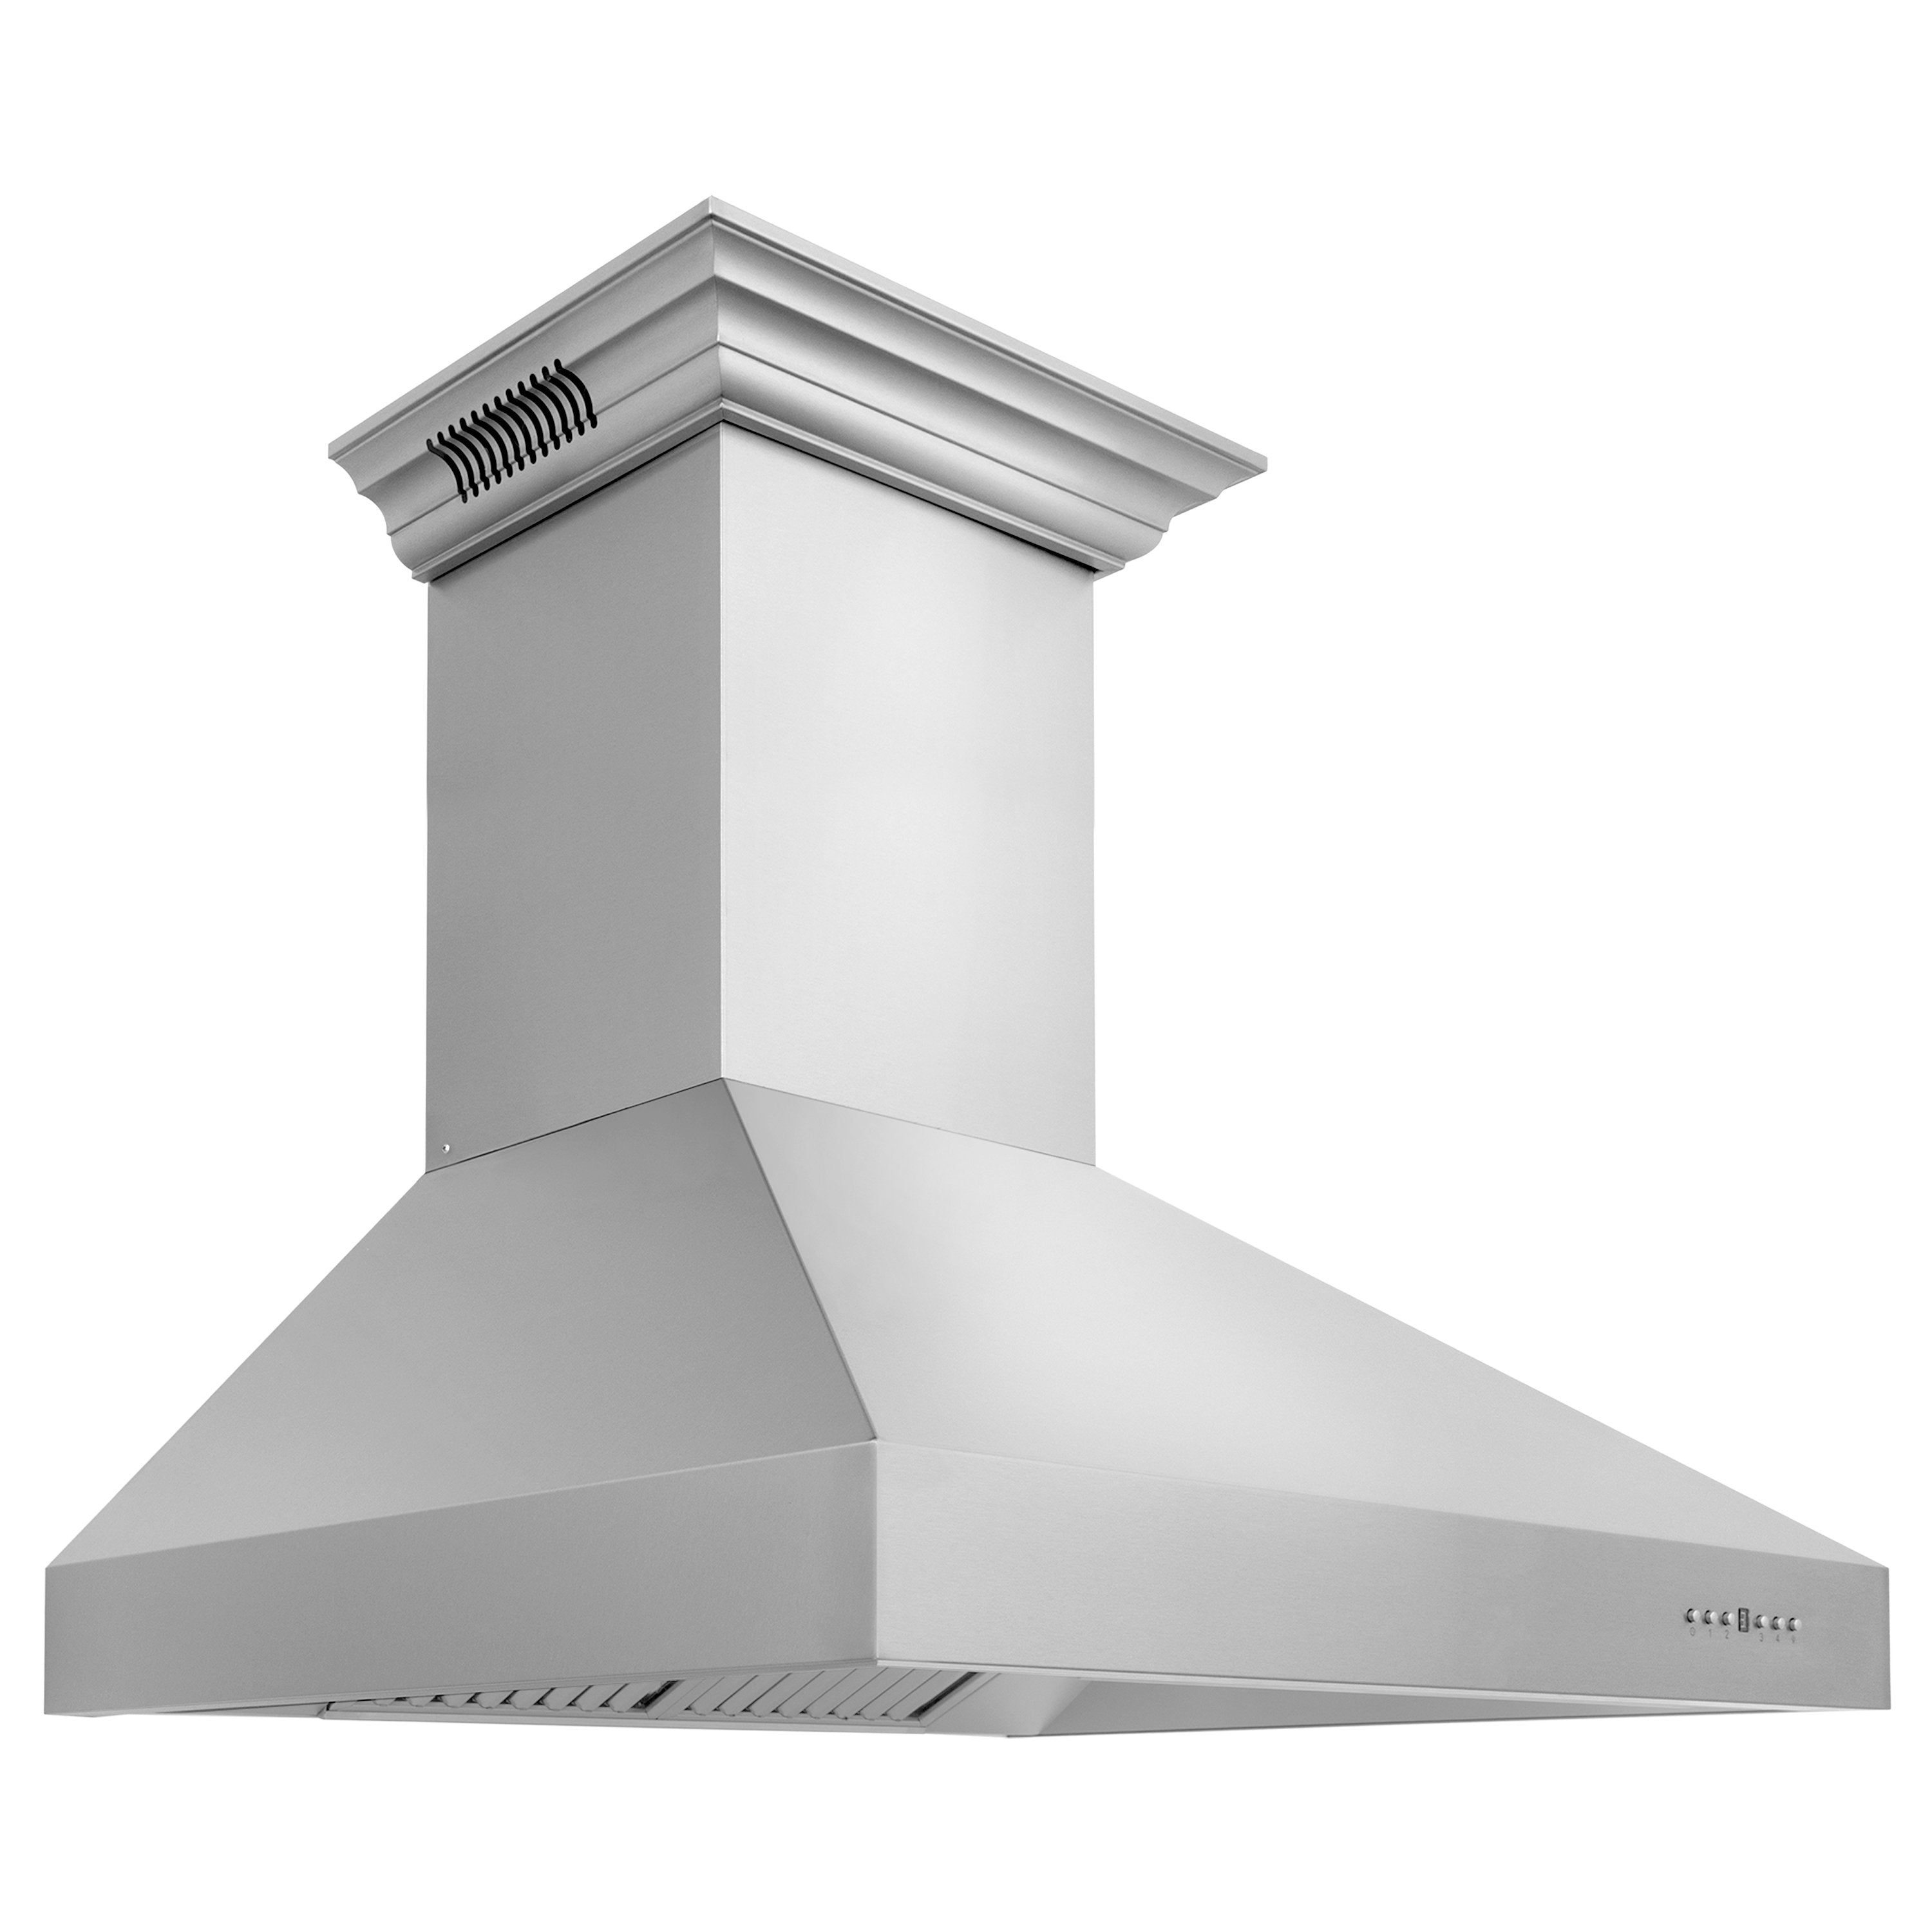 36" ZLINE CrownSound‚ Ducted Vent Wall Mount Range Hood in Stainless Steel with Built-in Bluetooth Speakers (697CRN-BT-36)